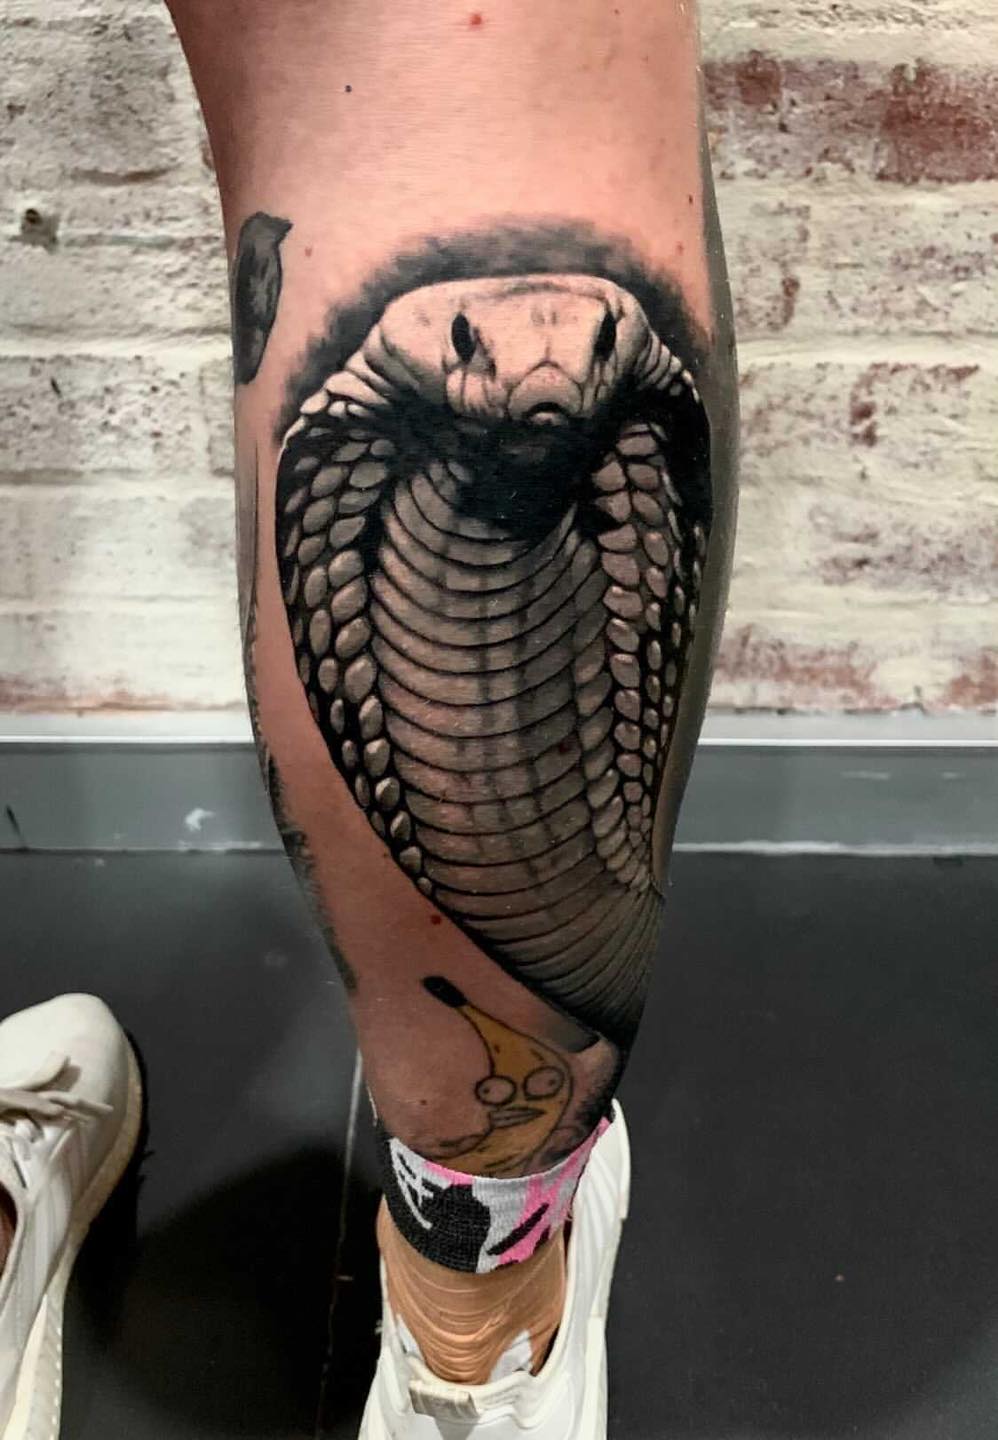 Tattoo Artists in Newcastle, New South Wales